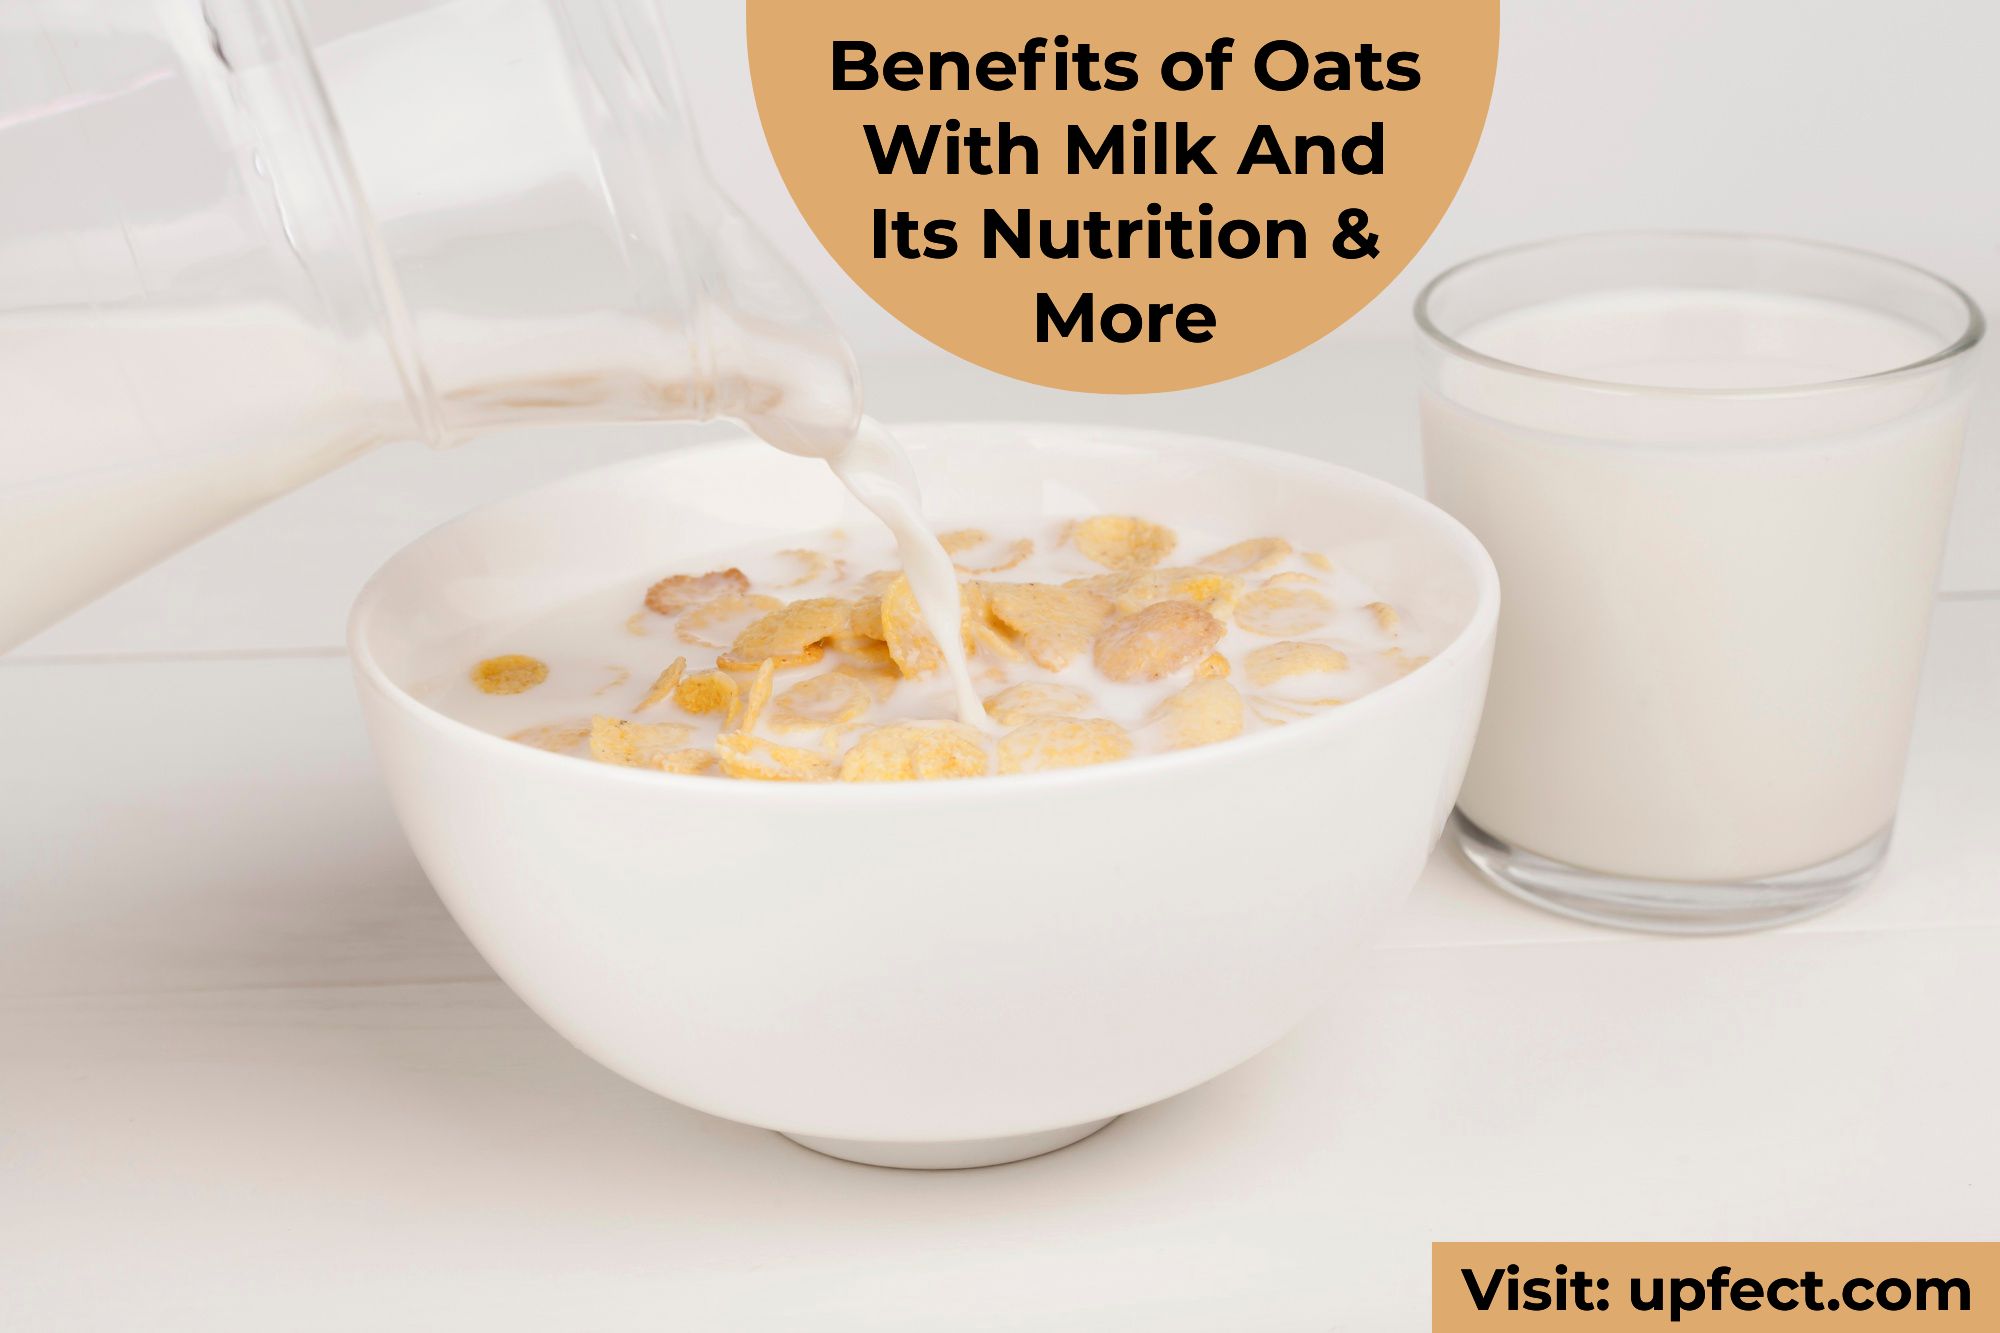 Benefits of Oats With Milk